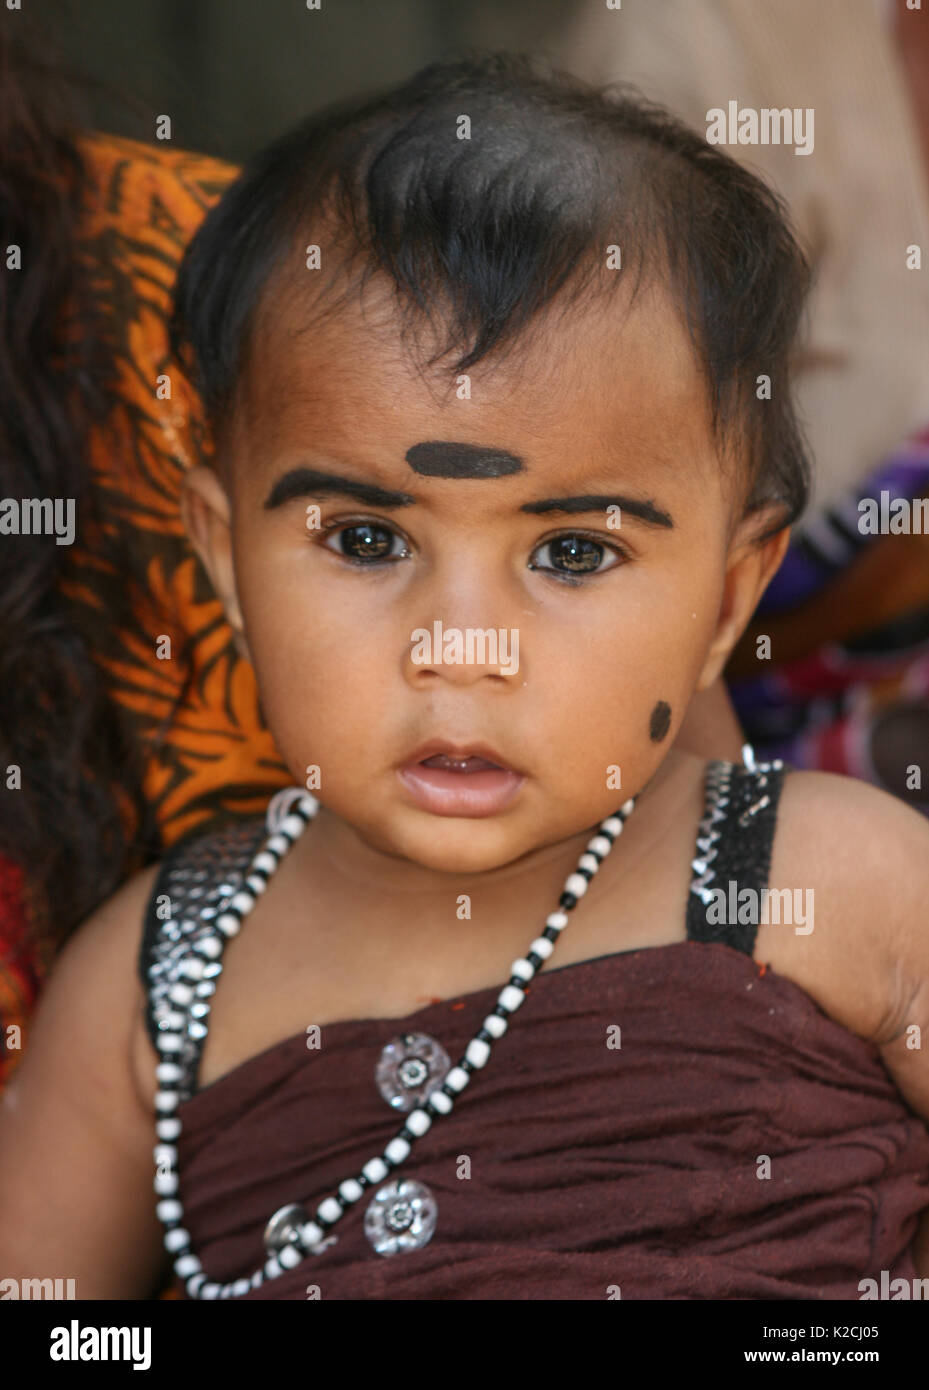 head and shoulder of a female Asian Indian young baby toddler girl made up with black kohl eyeliner pencil cosmetics looking at into camera Stock Photo